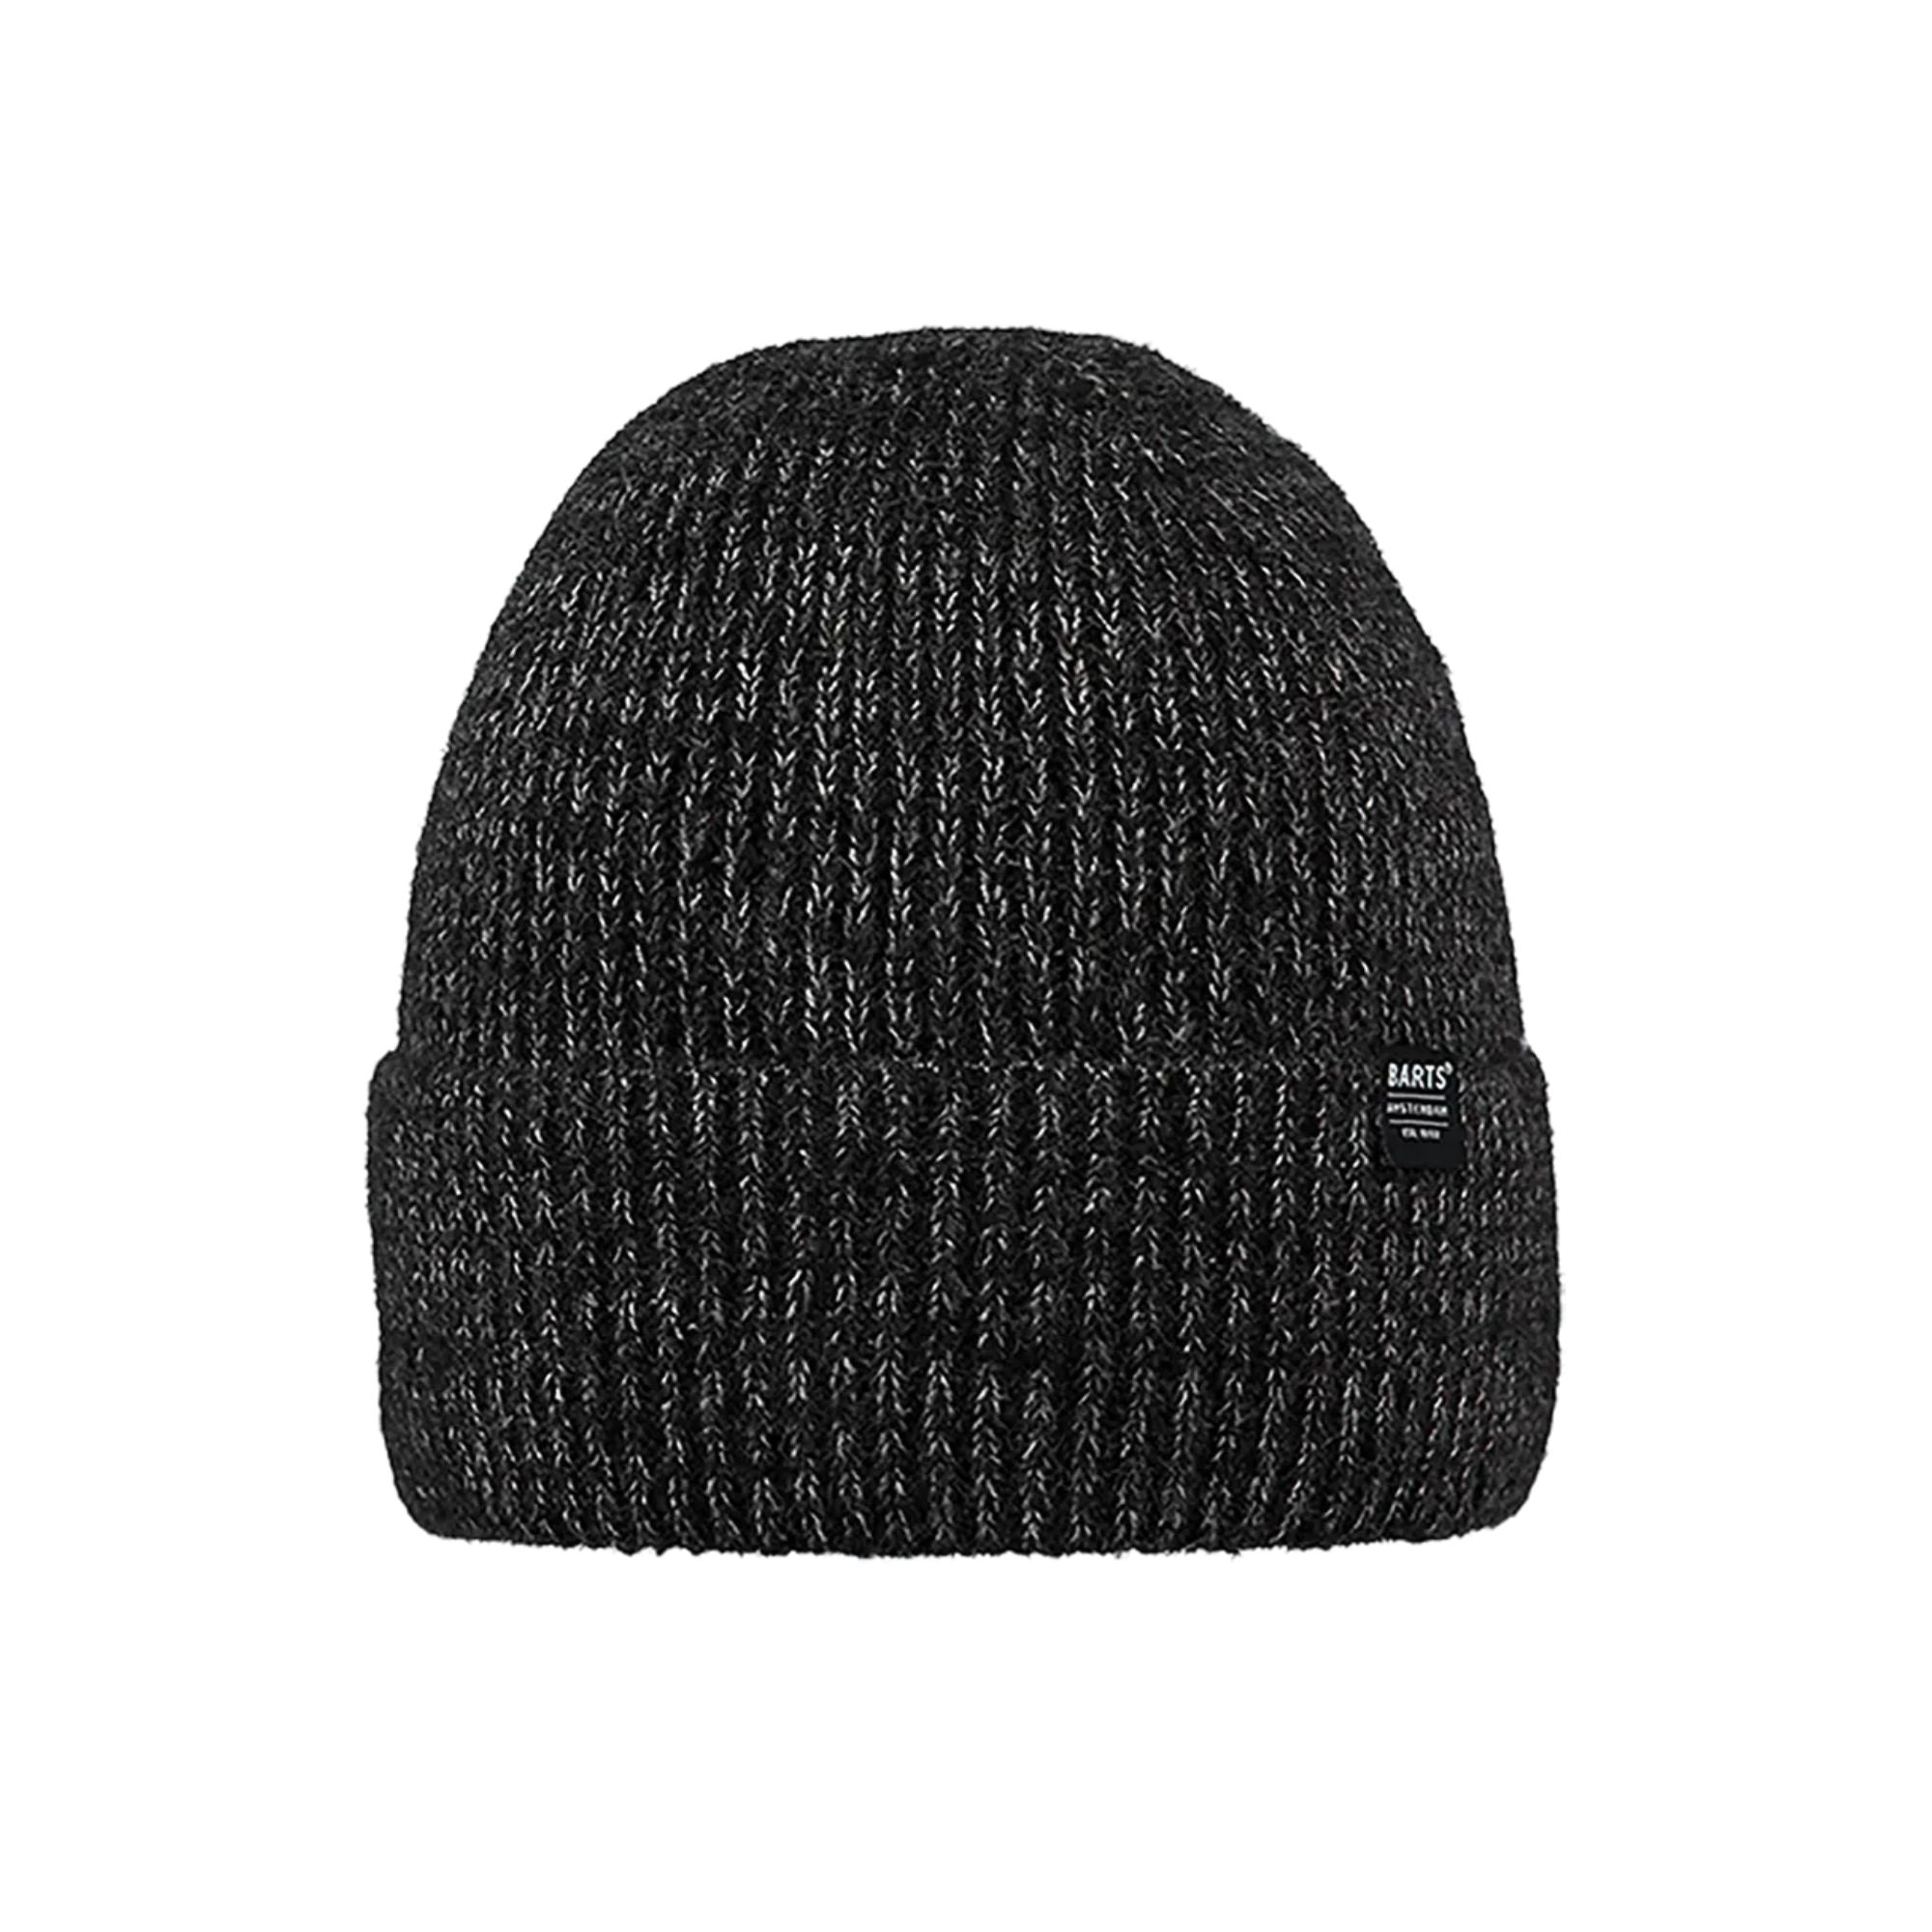 BARTS Willian Beanie | BARTS | Portwest - The Outdoor Shop